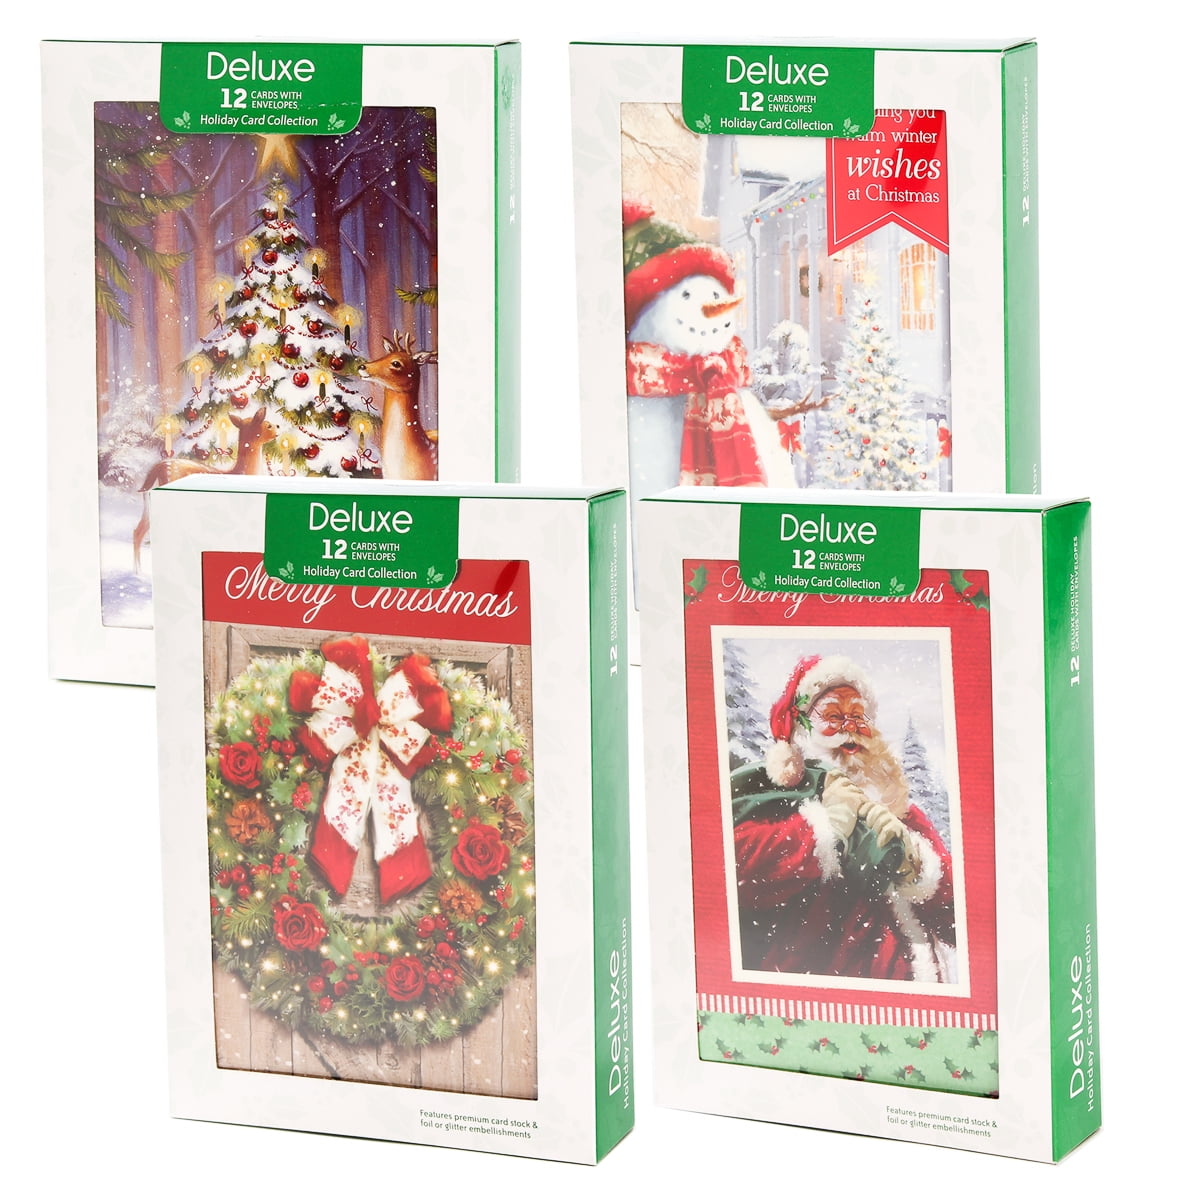 Set of 3 deluxe handmade Holiday cards/ Snowman cards/ Most Wonderful Time of the Year cards/ Glittery Christmas cards